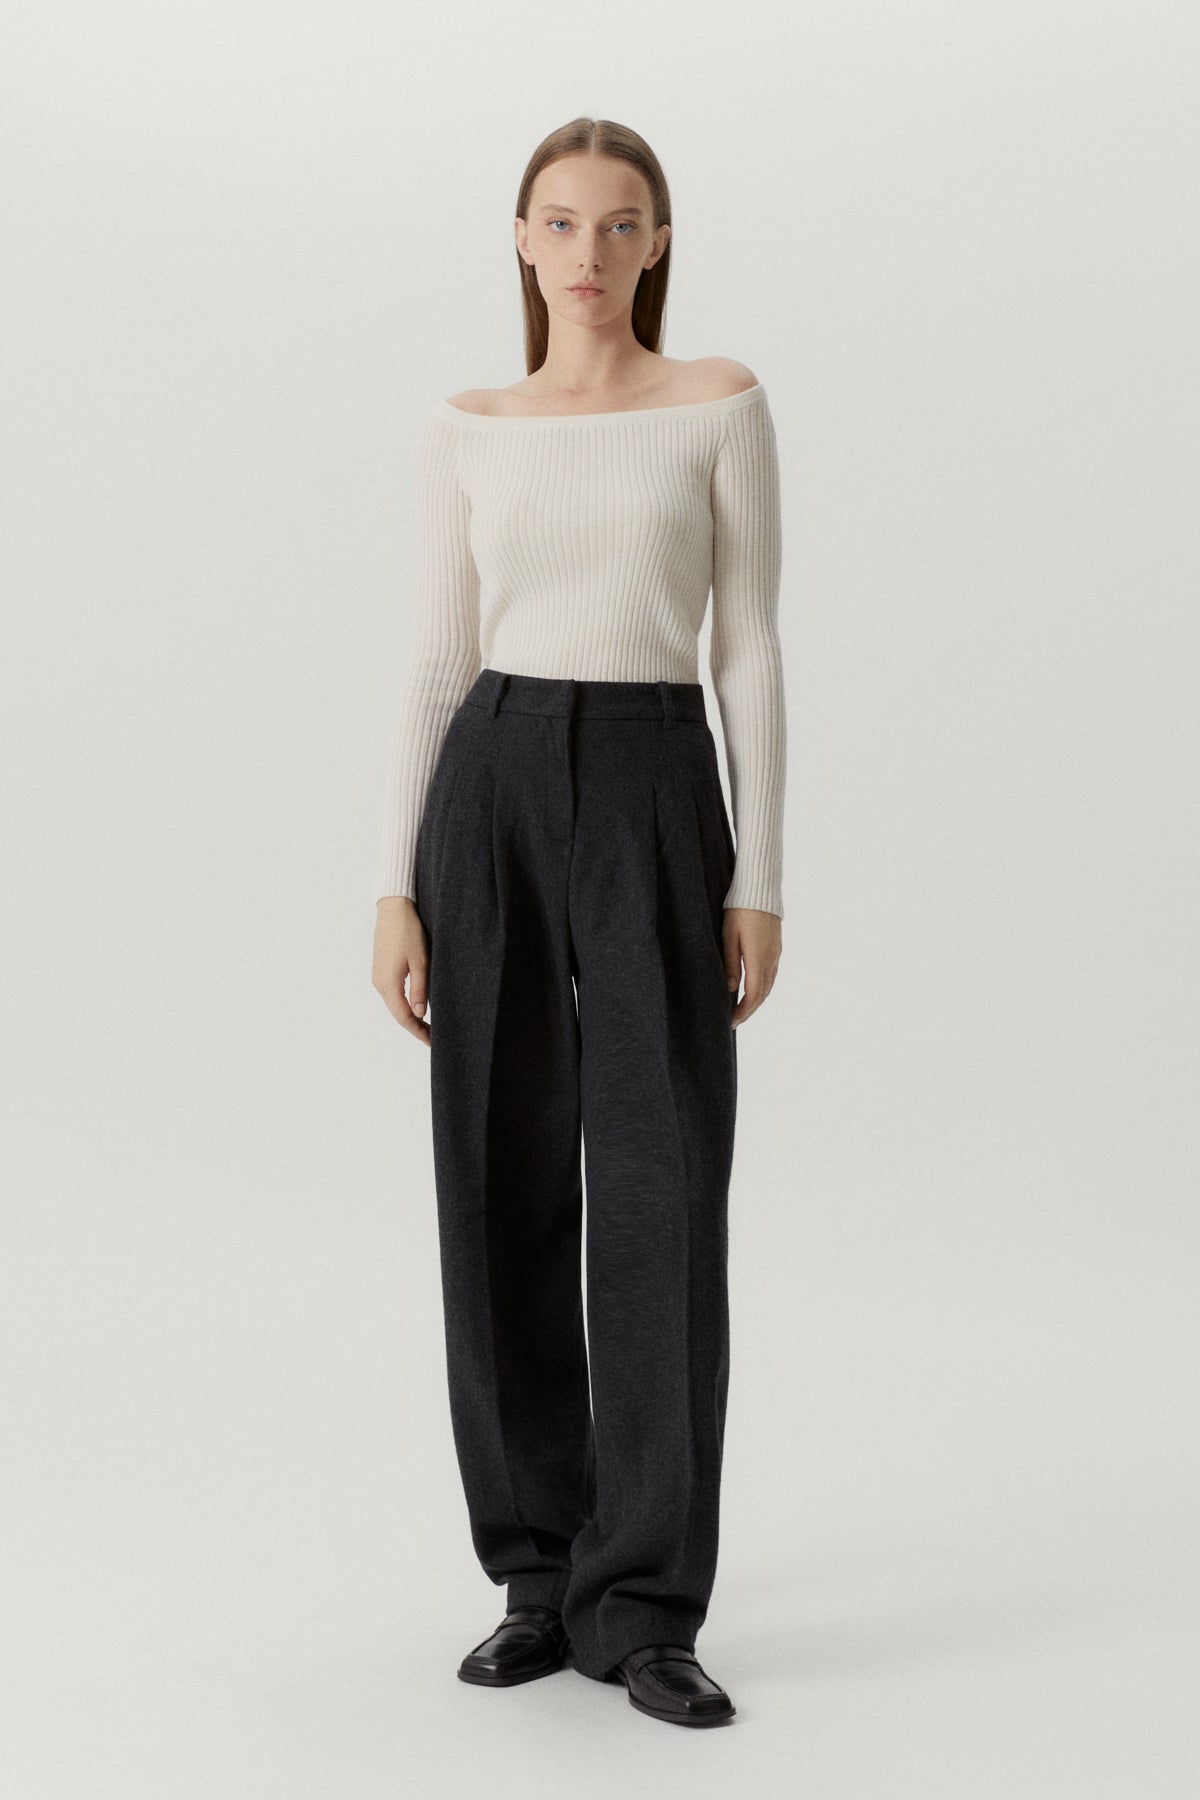 the merino wool off the shoulder top snow white